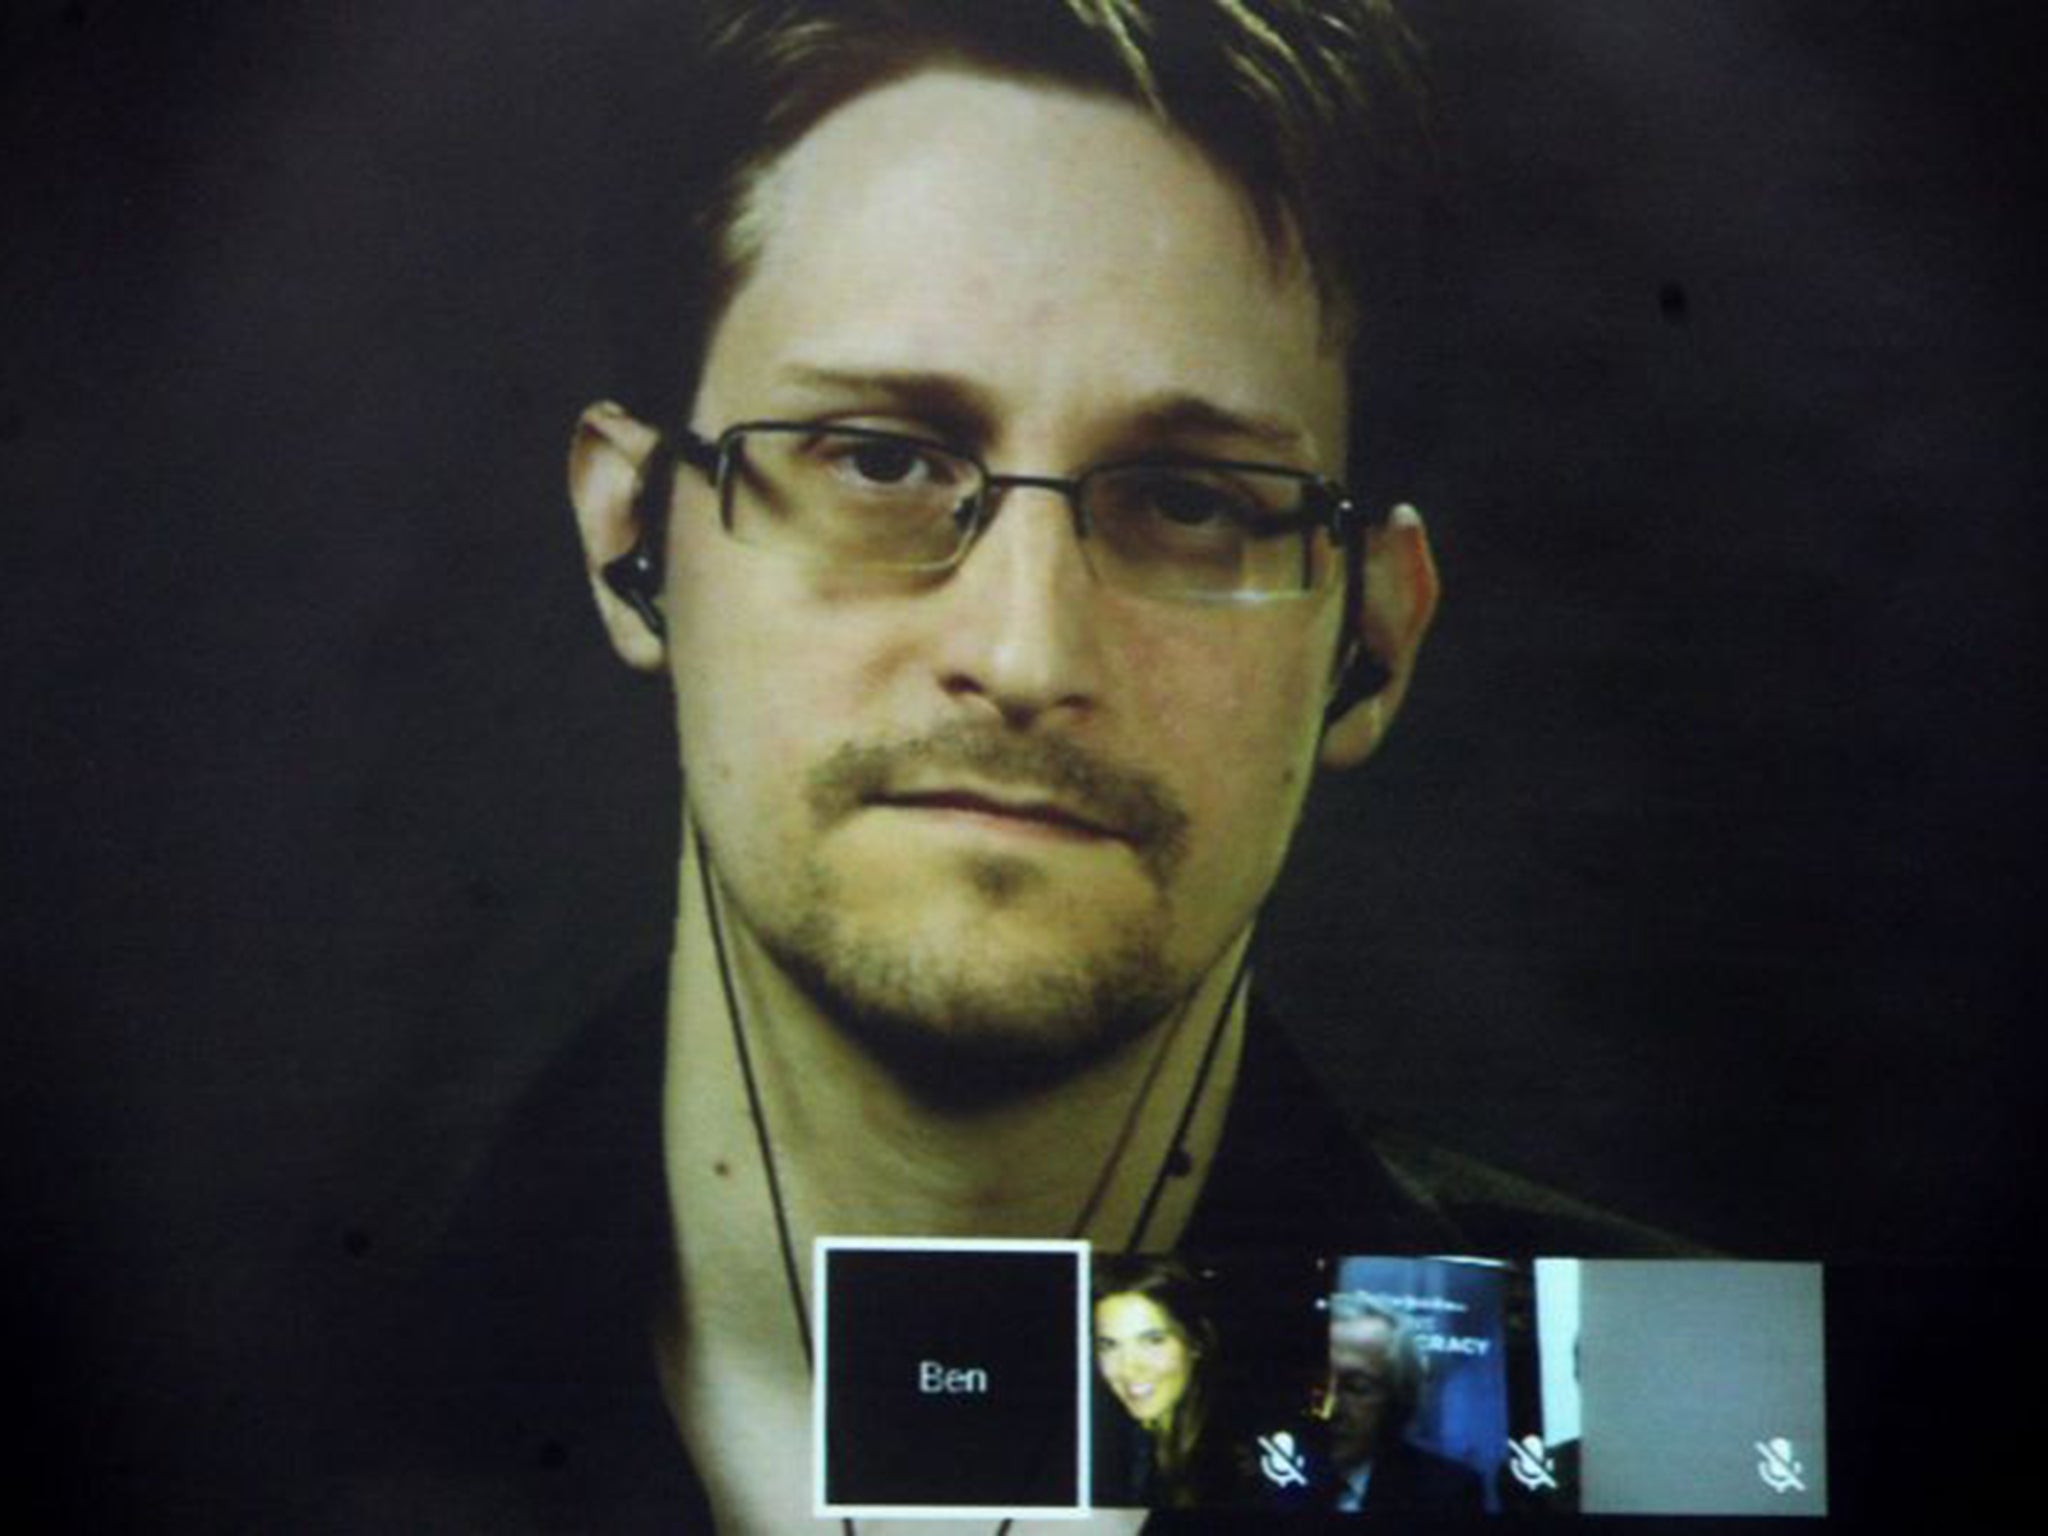 &#13;
Stone found the real life Edward Snowden to be like a ‘boy scout’ when he met him &#13;